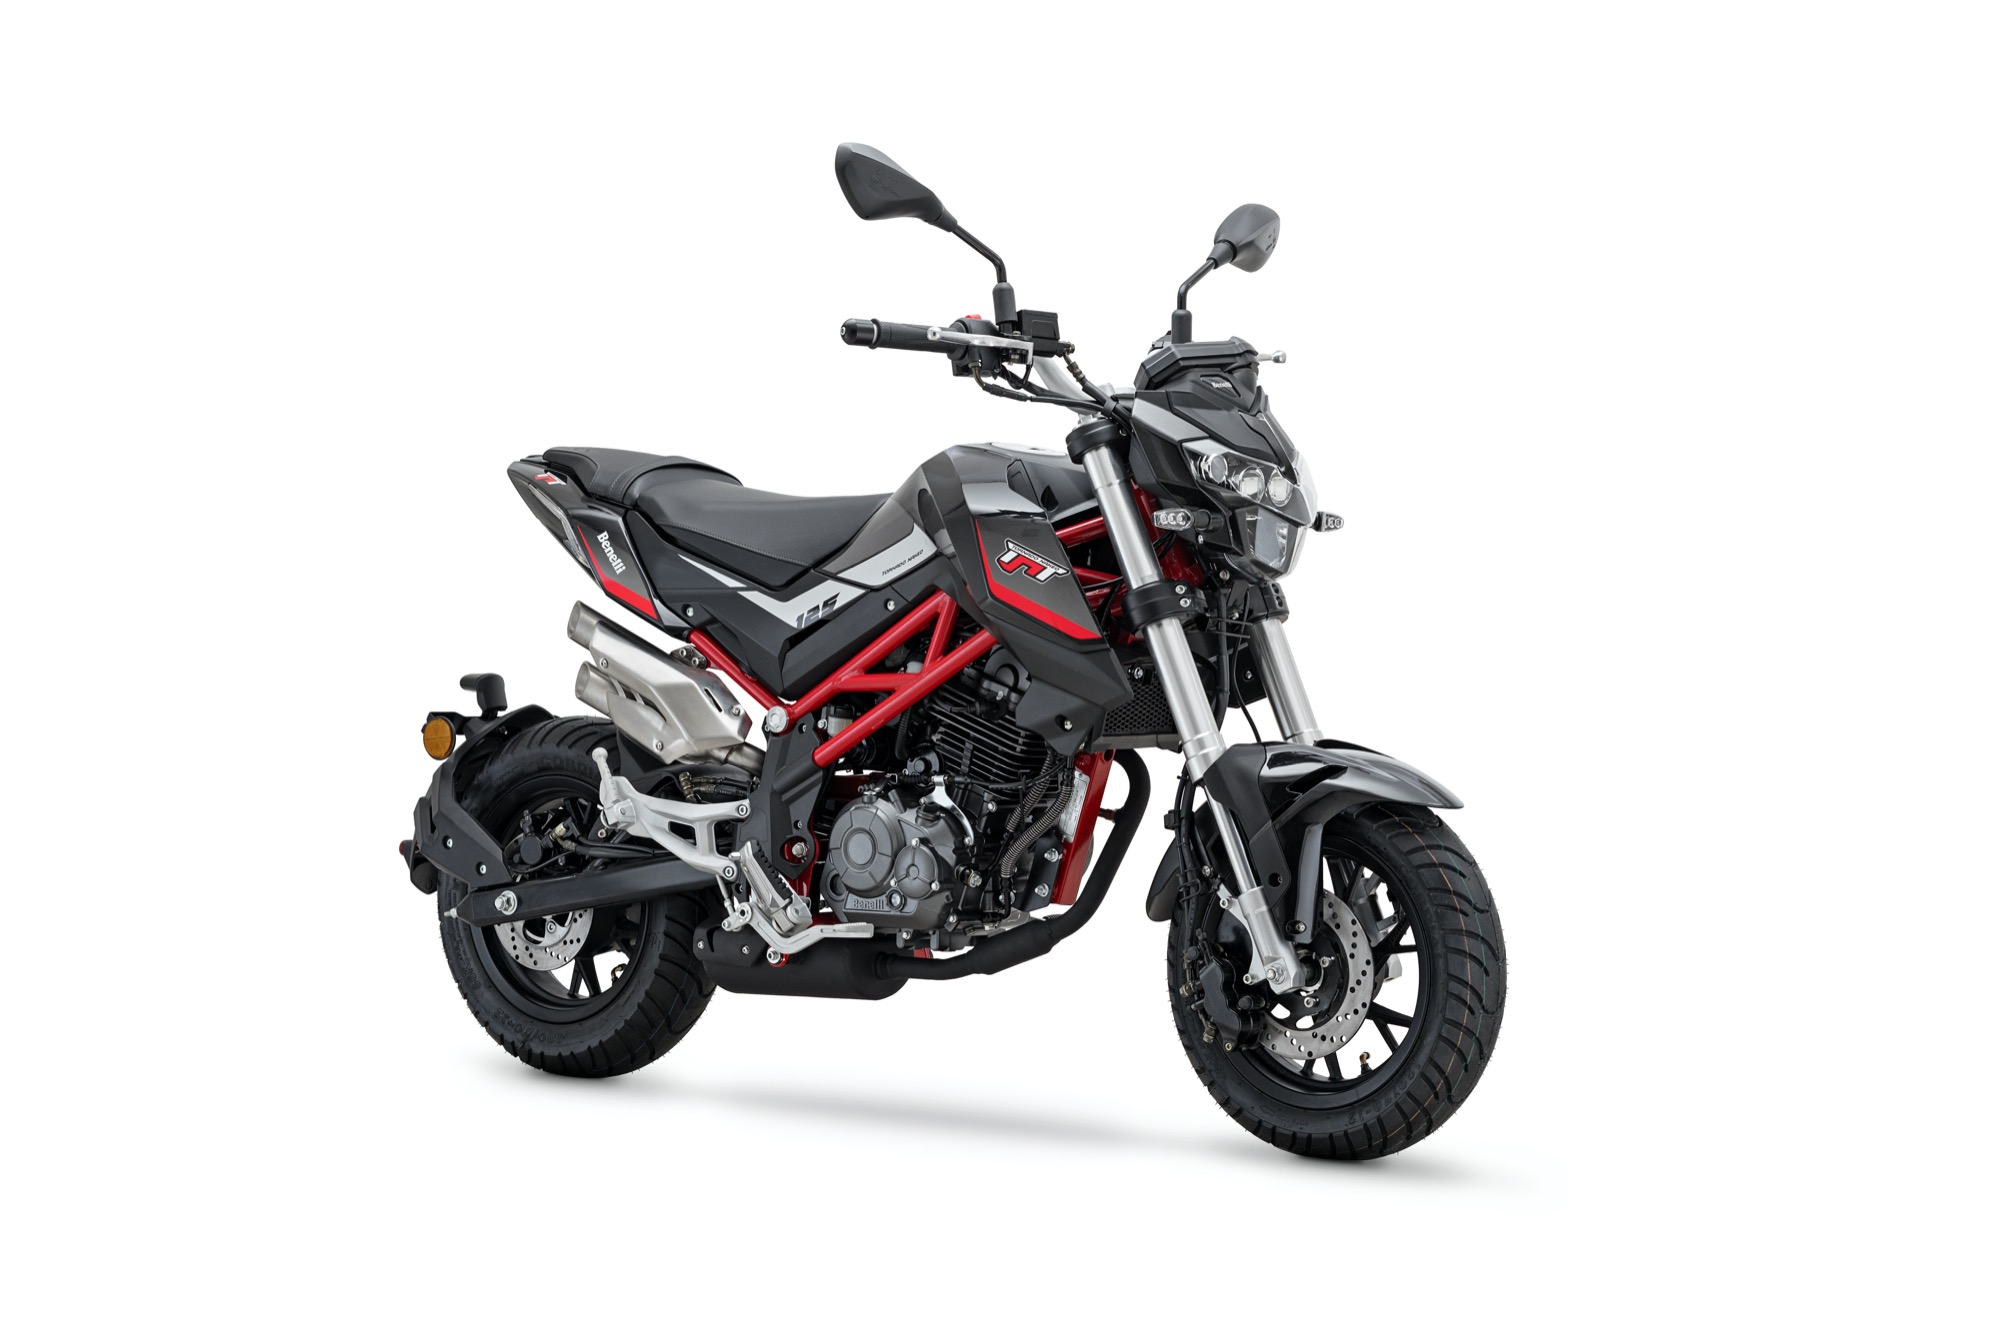 BENELLI TORNADO 125cc TNT NAKED T NEW FOR 2020 GREEN | in 